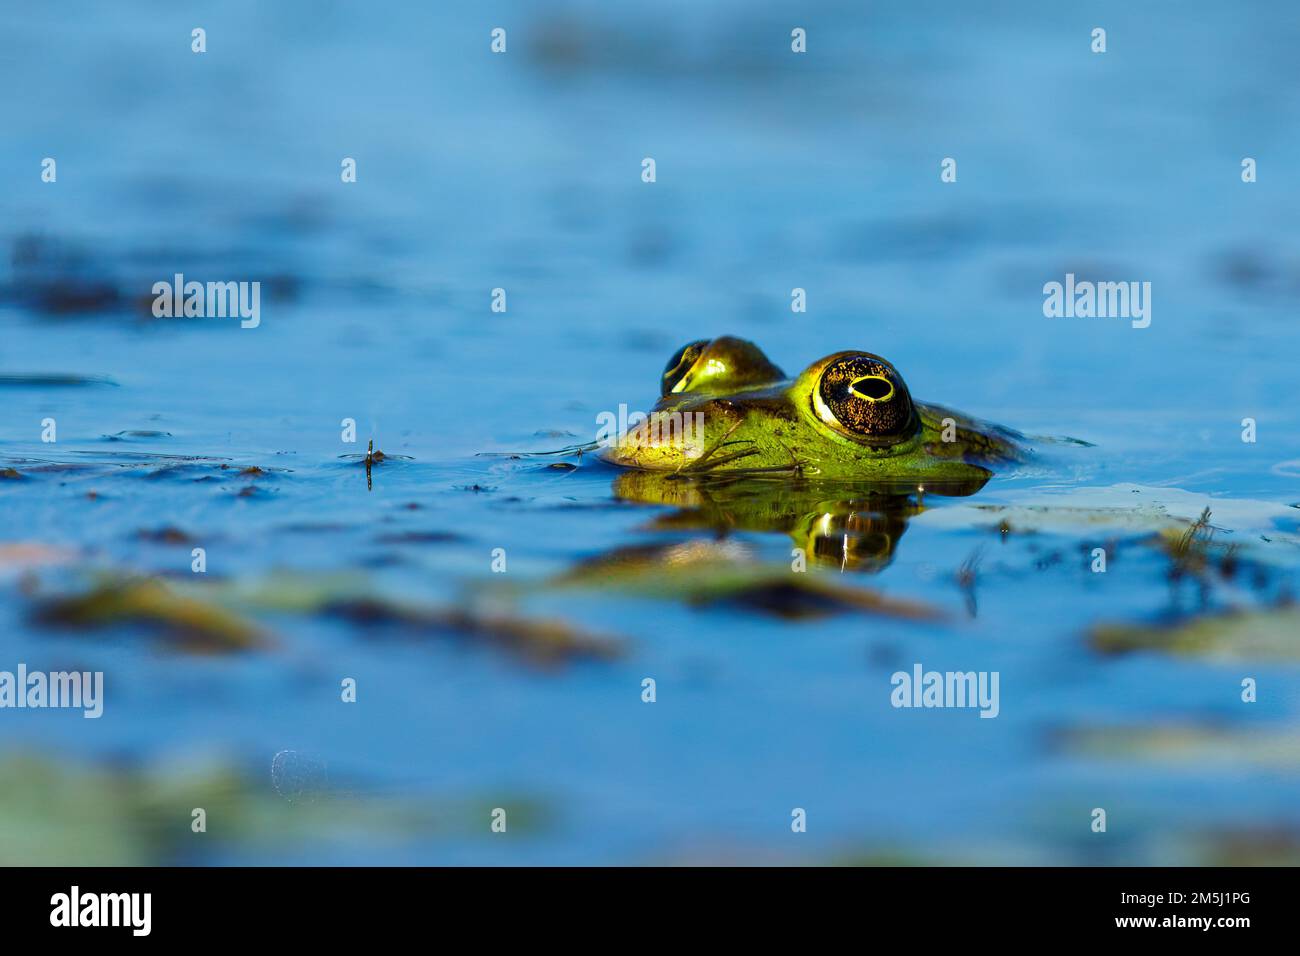 A frog in the swamps of the danube delta Stock Photo